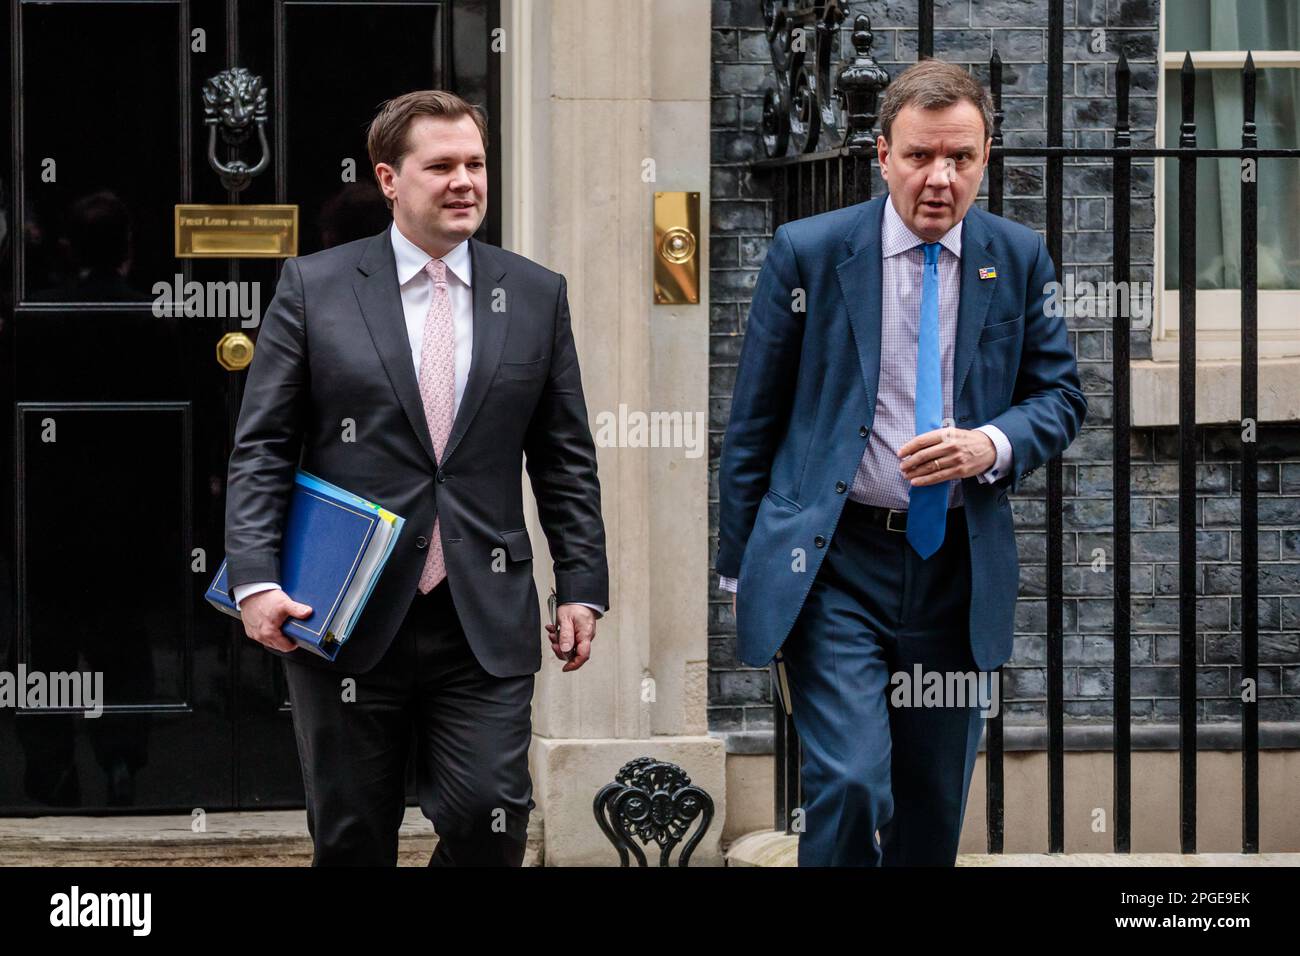 Downing Street, London, UK. 21st March 2023.  Robert Jenrick MP, Minister of State (Minister for Immigration) in the Home Office, and Greg Hands MP, Conservative Party Chair, attends the weekly Cabinet Meeting at 10 Downing Street. Photo by Amanda Rose/Alamy Live News Stock Photo